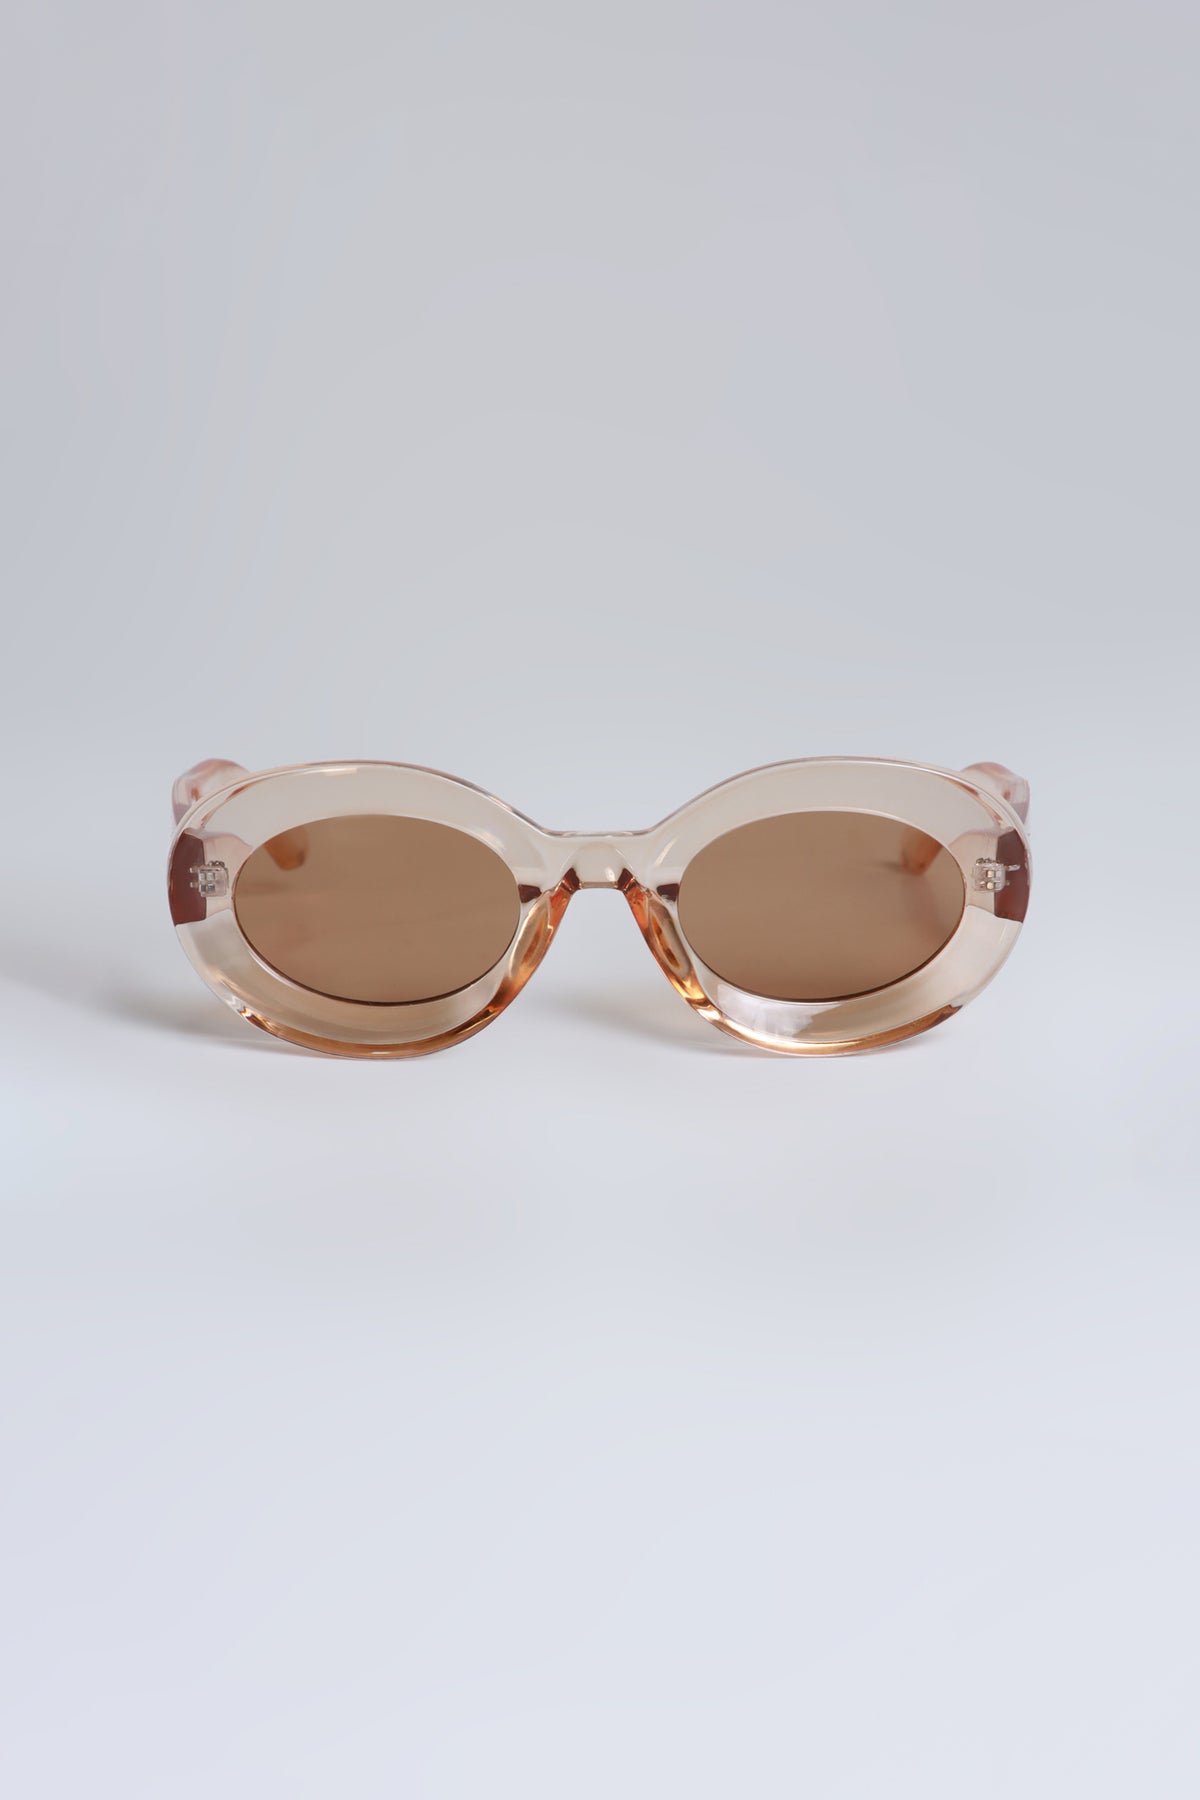 
              See You Out Retro Rounded Sunglasses - Light Peach - Swank A Posh
            